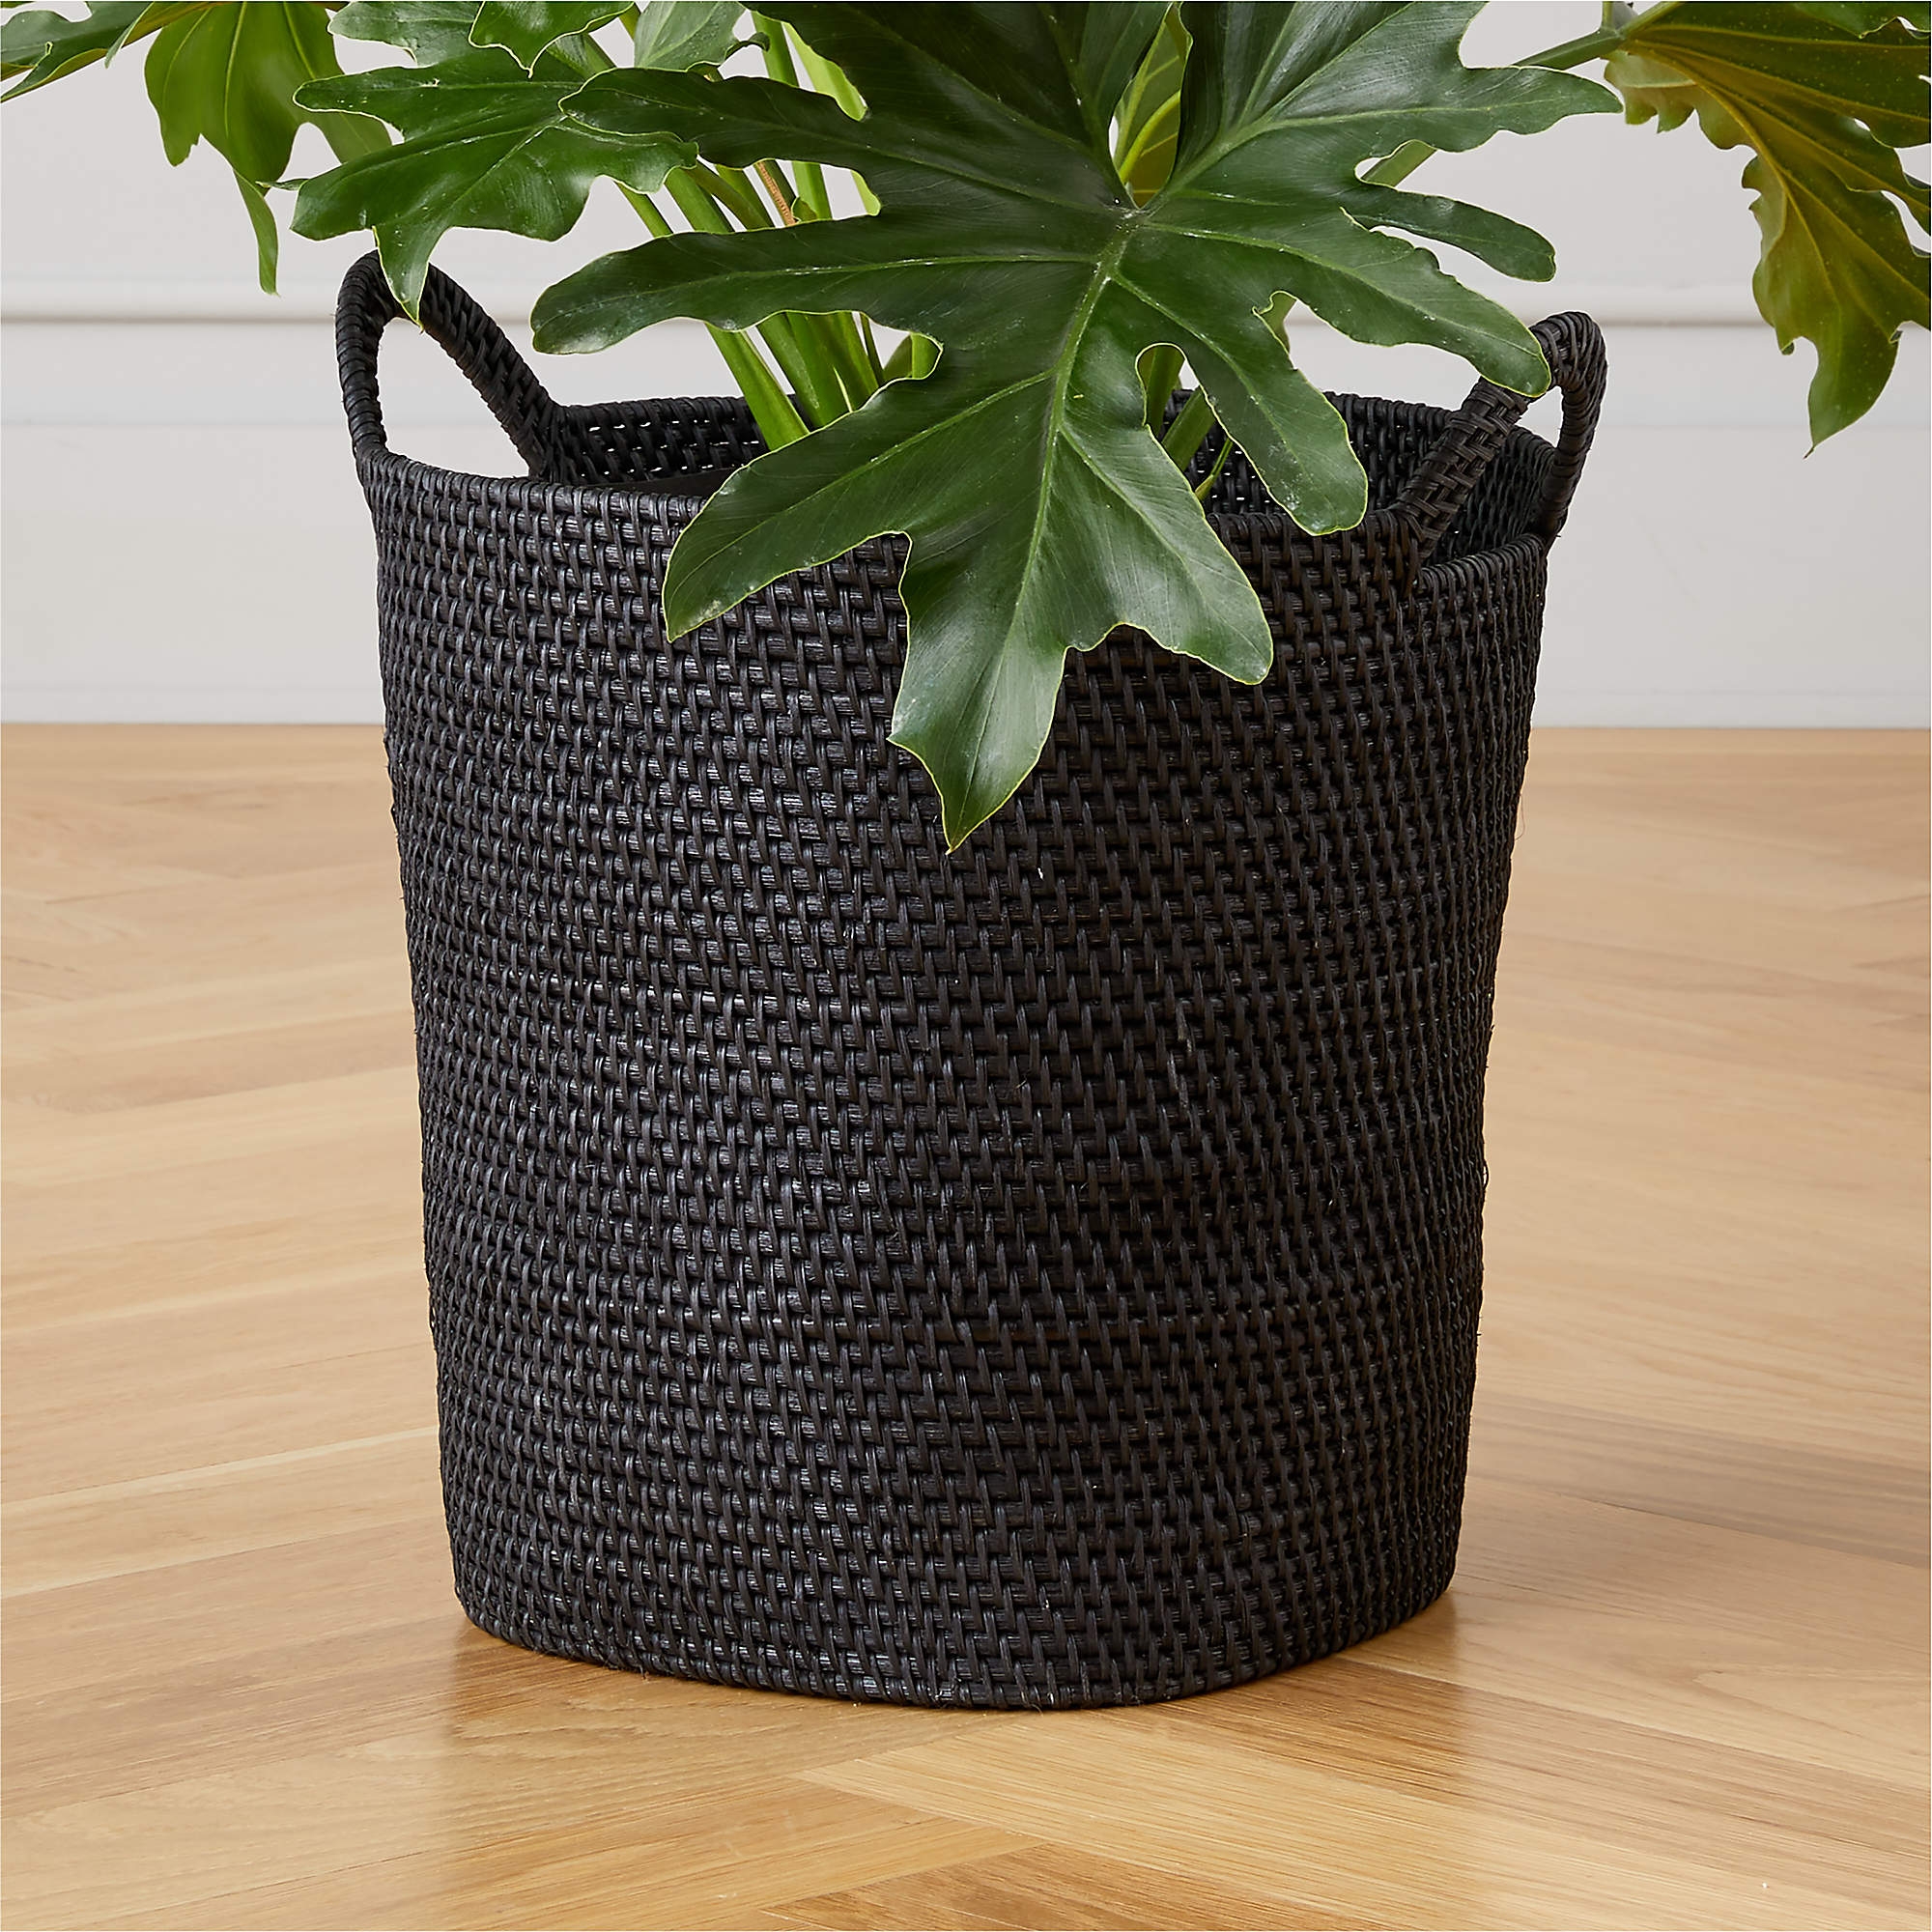 Jazz Basket with Handles, Small, Black - Image 2